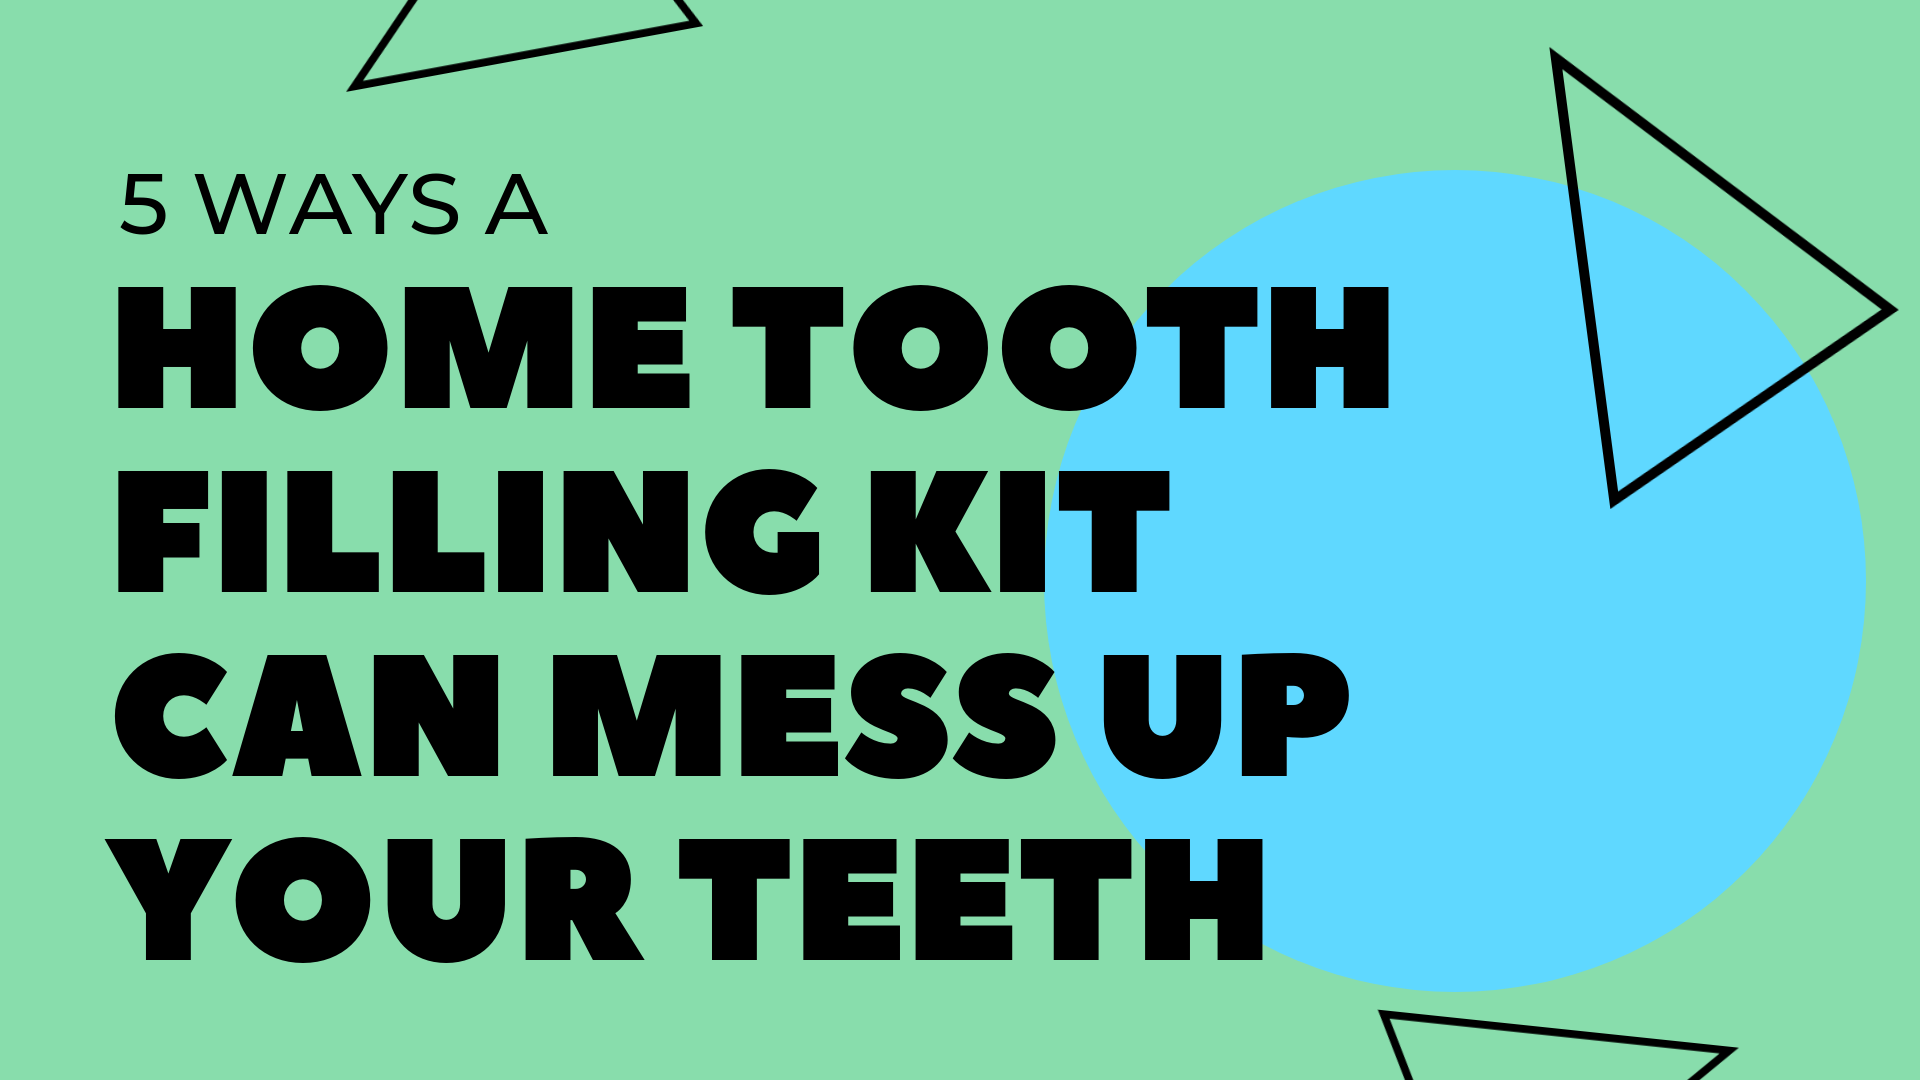 5 Ways a Home Tooth Filling Kit Can Mess up Your Teeth